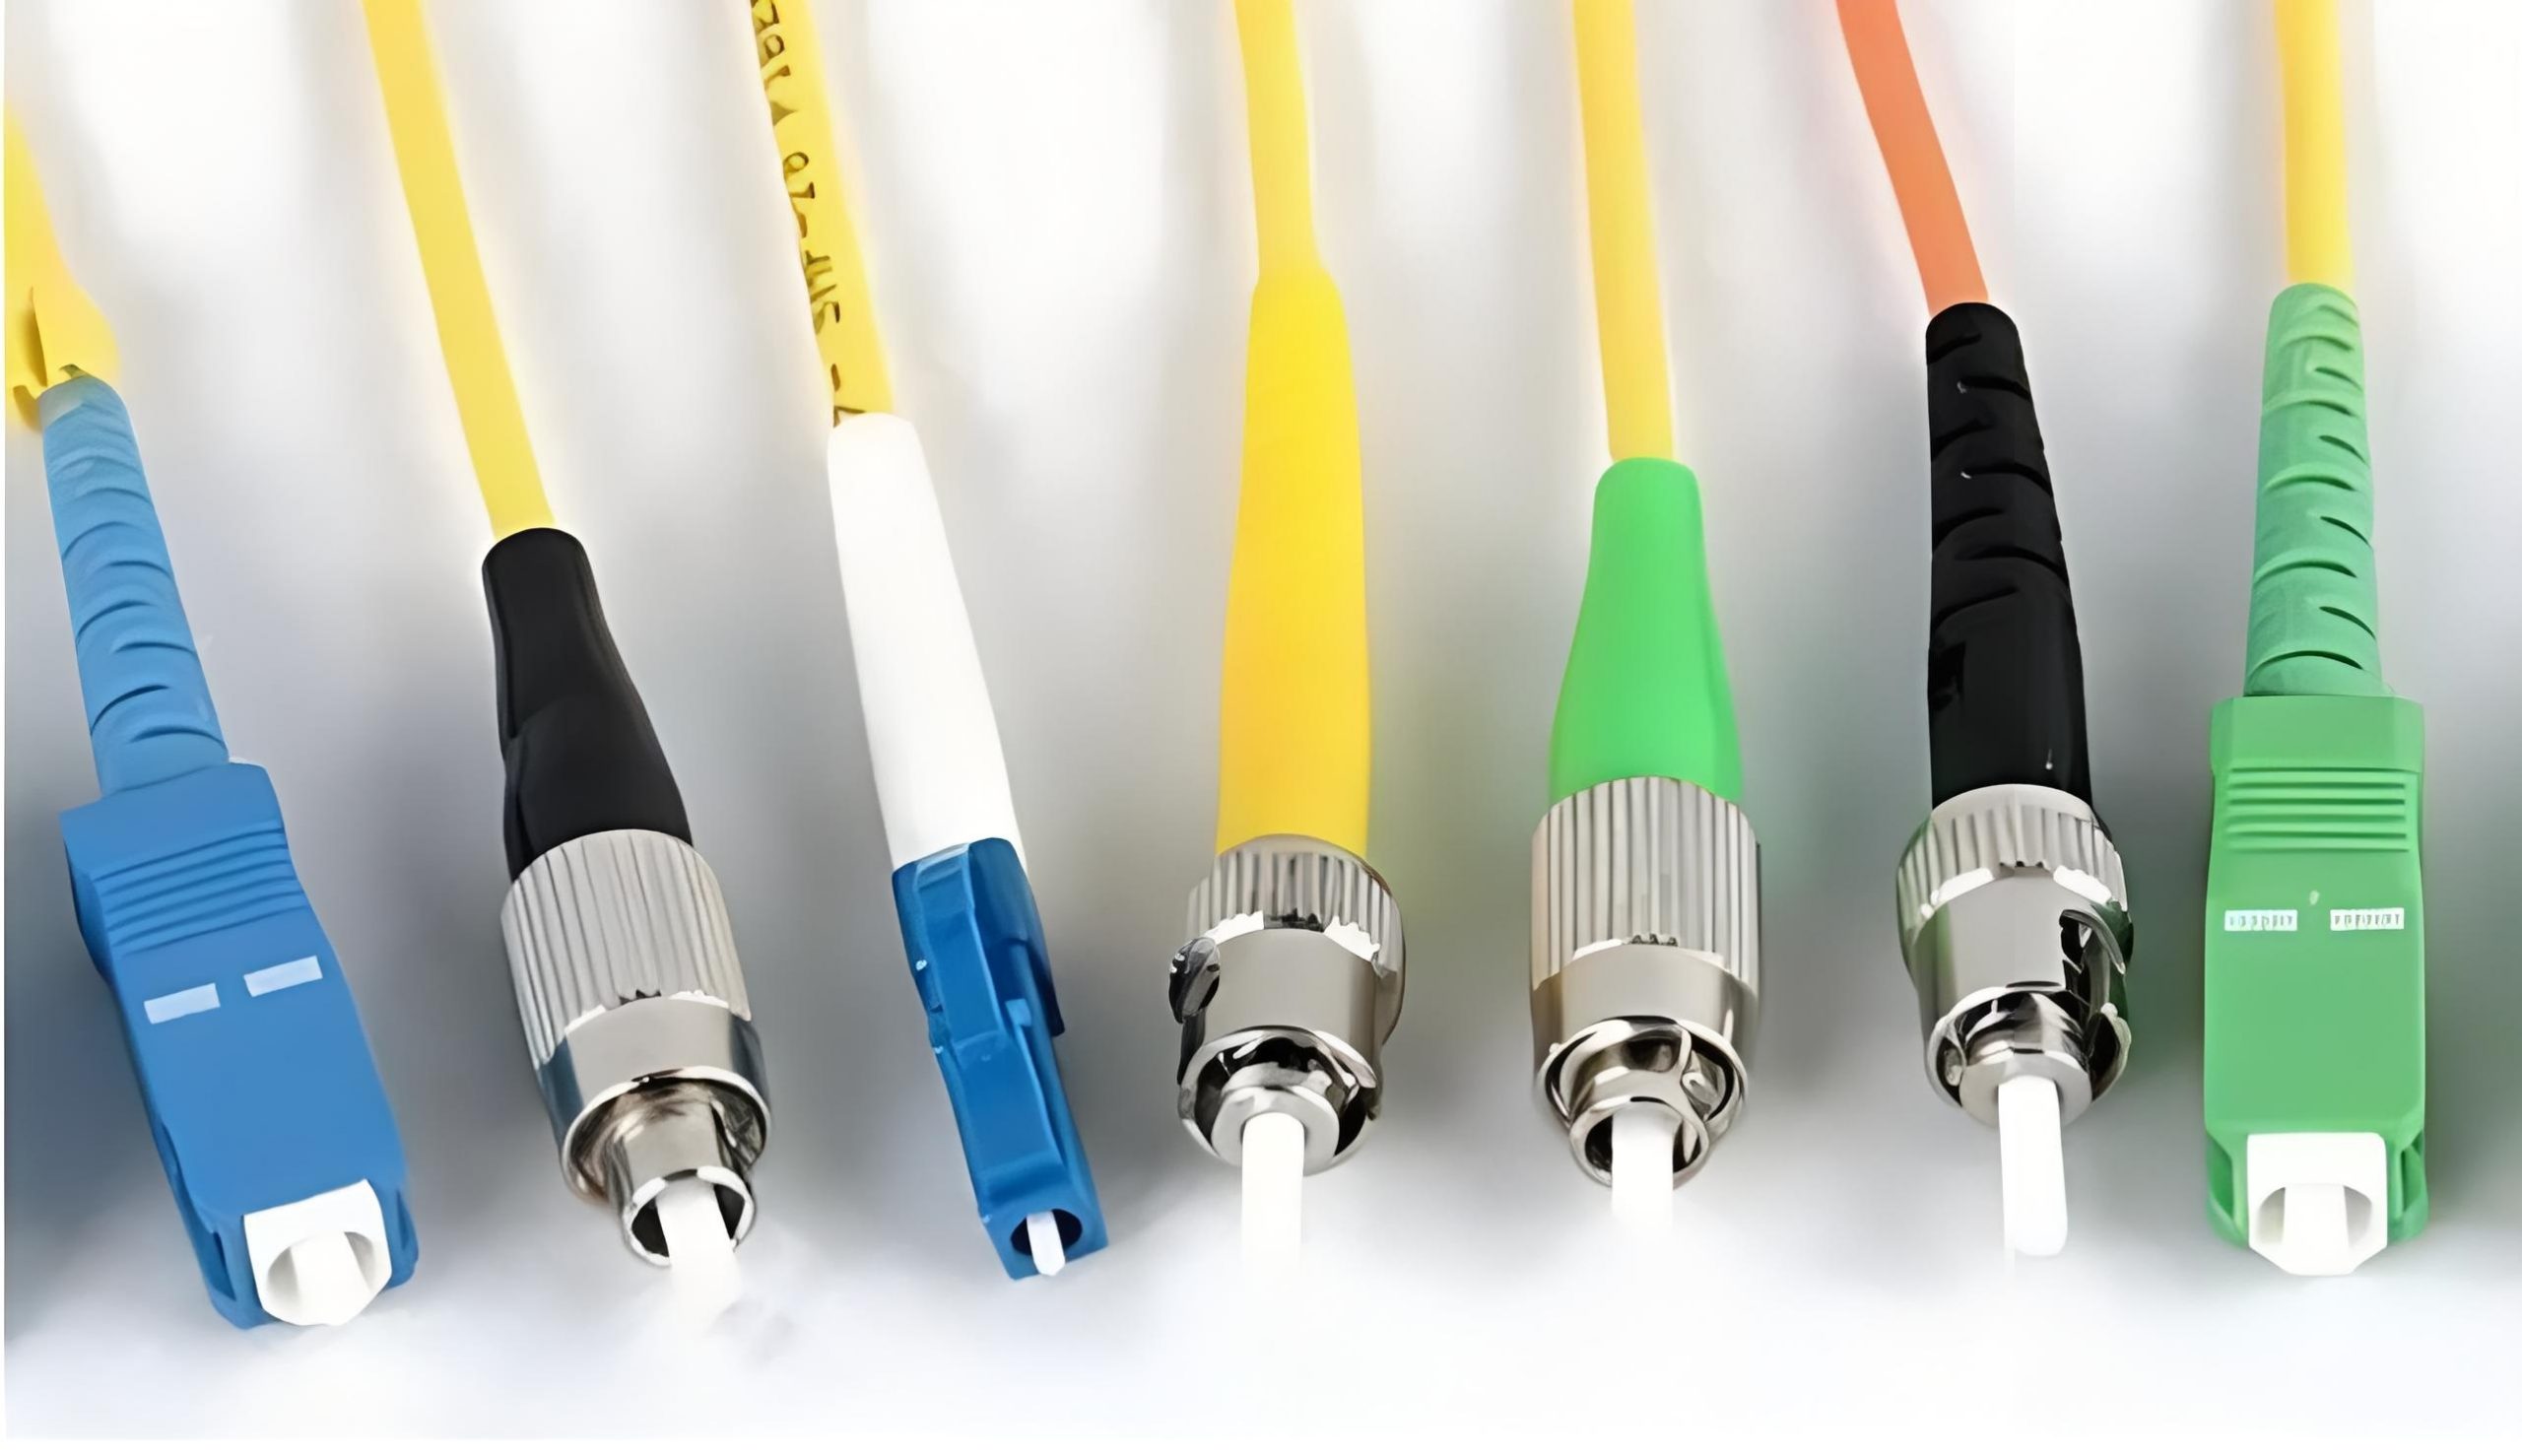 ftth drop,ftth drop cable,ftth drop cable installation,ftth drop cable clamp,ftth drop cable price,ftth drop kabel,ftth drop cable distributor,ftth dropkabel,ftth drop cable cost,ftth drop cable specification,2 core ftth drop cable,types of ftth drop cable,outdoor ftth drop cable,ftth drop cable price,fiber drop cable installation,Drop cable,gjyxch-1b6a1,gjyxch-1b6,gjyxch-2b6,gjyxch-1b6a2,ftth network,ftth installation,ftth technology,ftth speed,ftth cable